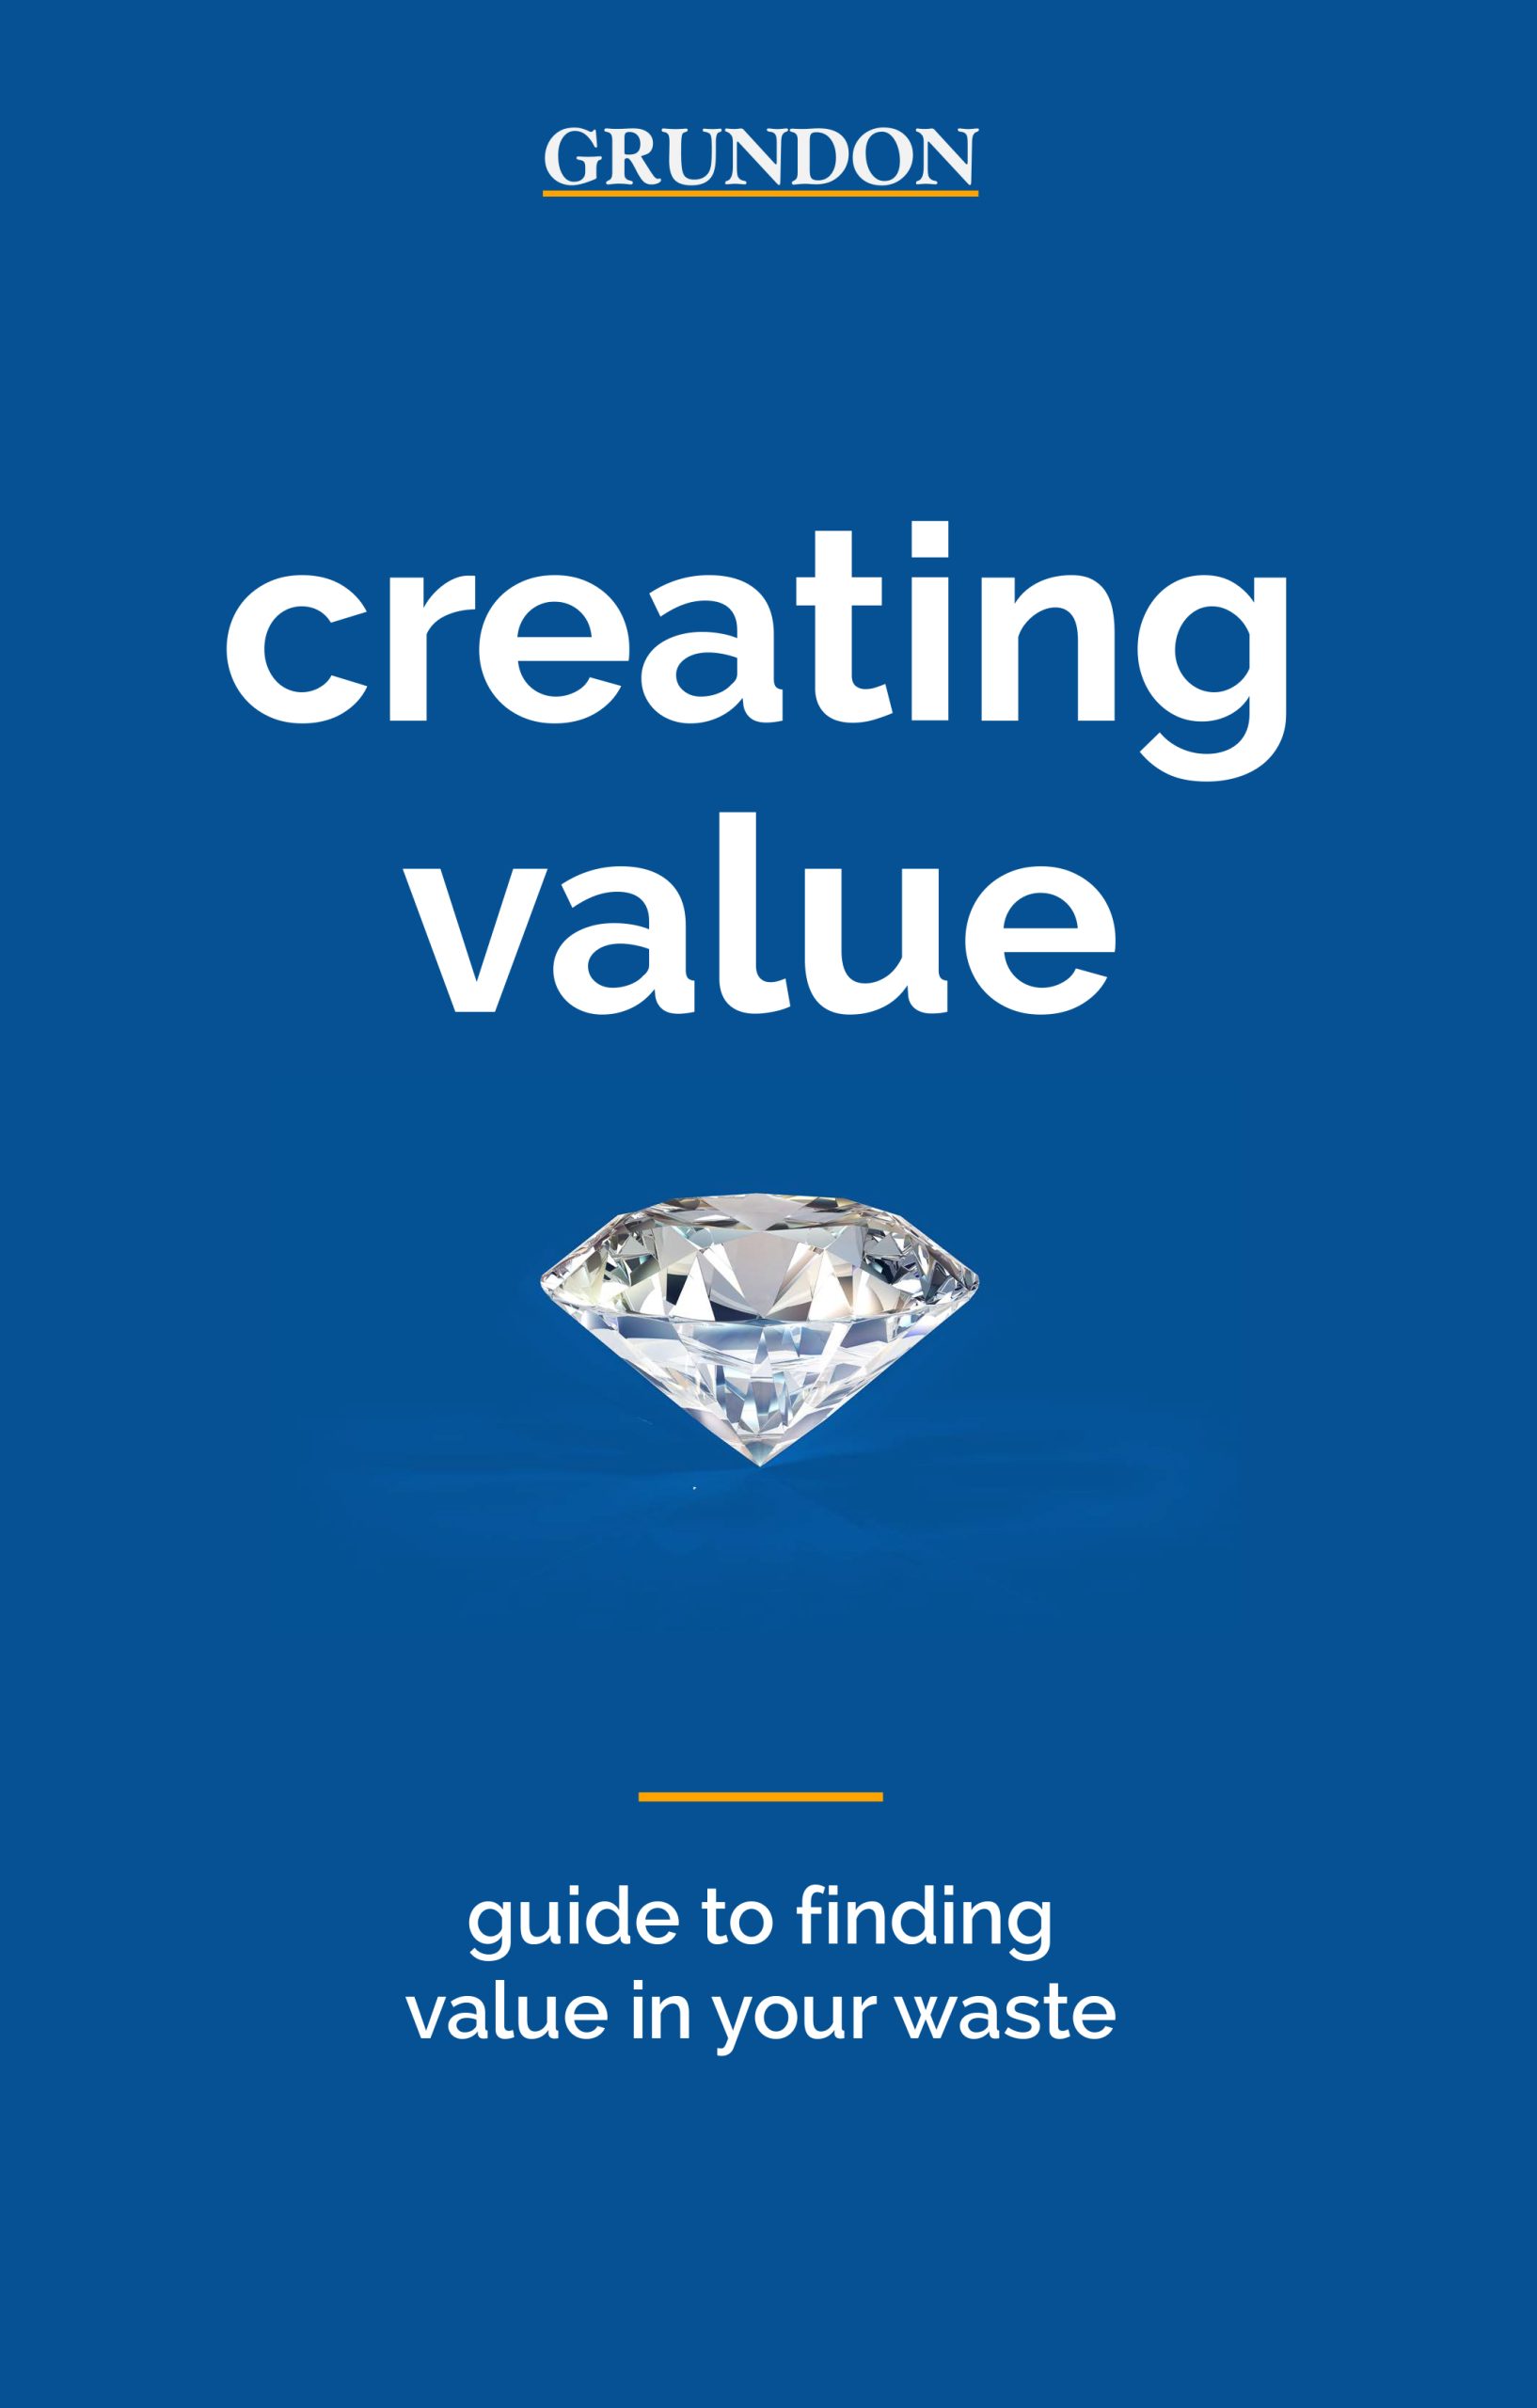 Creating value - Free guide to finding value in your waste